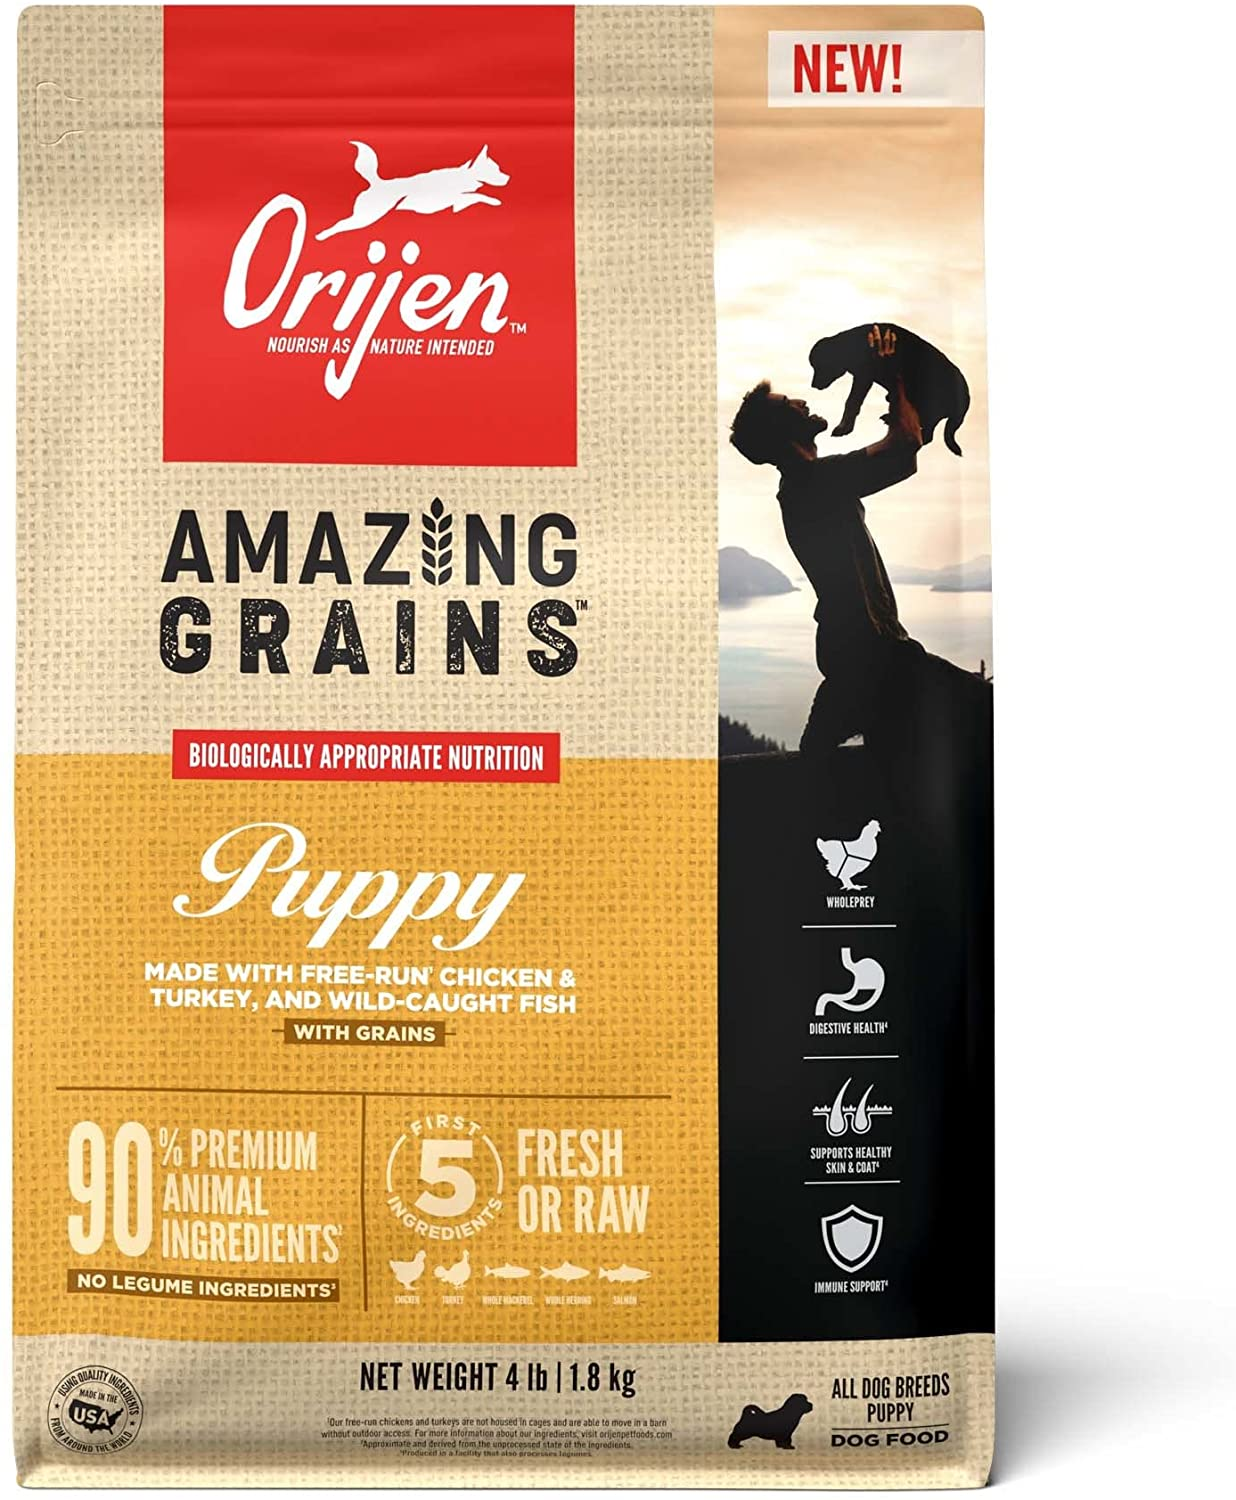 ® Dry Dog Food, High Protein, Amazing Grains Puppy 4LB